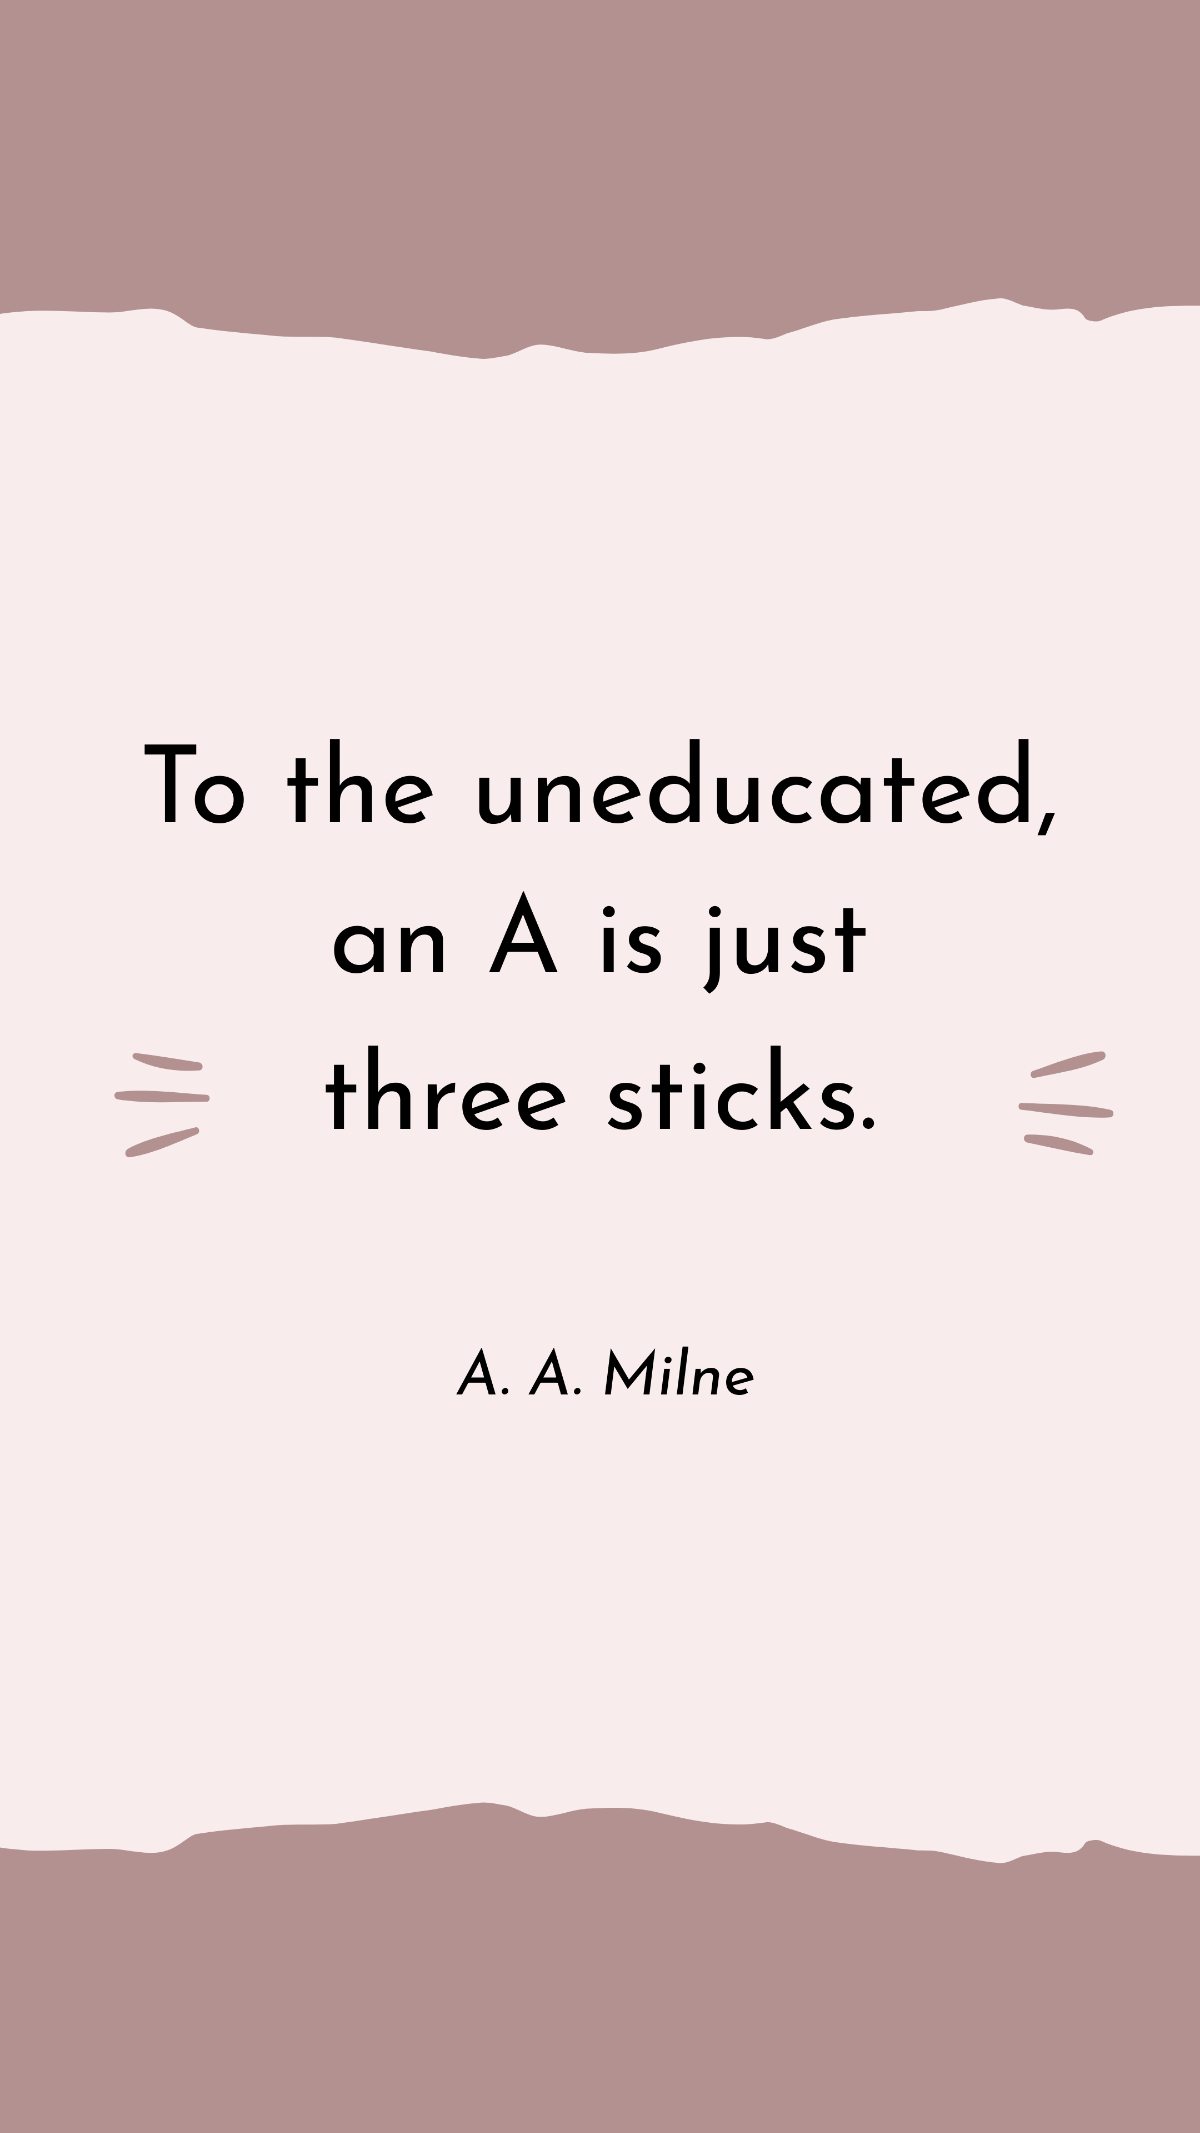 A. A. Milne - To the uneducated, an A is just three sticks. Template